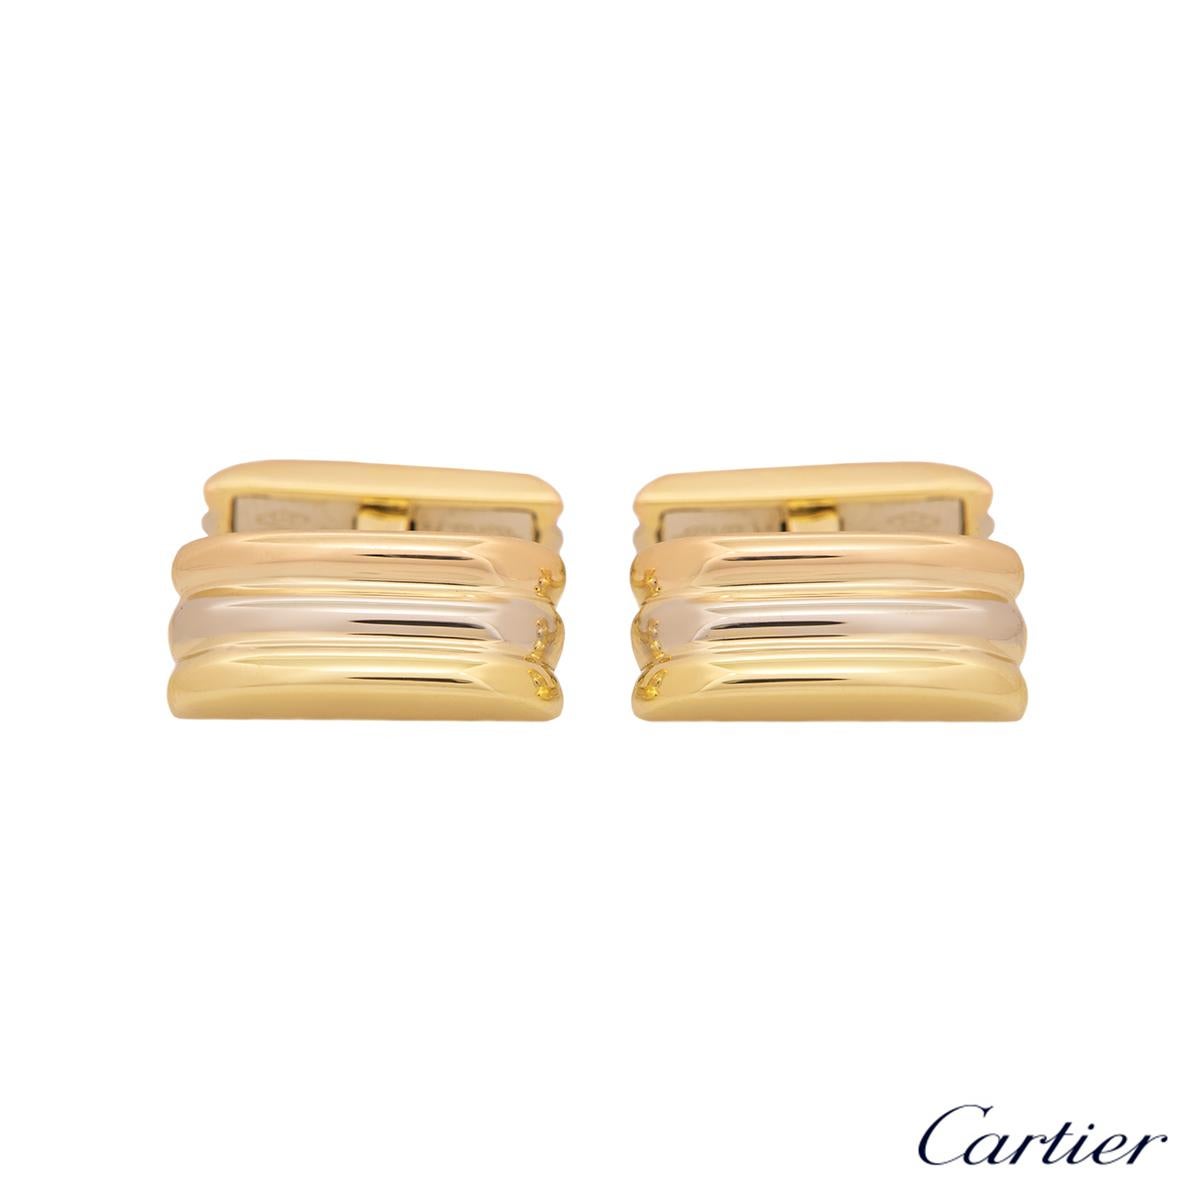 A stunning pair of 18k tri-colour gold cufflinks by Cartier from the Trinity De Cartier collection. The cufflinks are composed of a white, yellow and rose gold 3 bar row featuring a t-bar fitting. The cufflinks feature a length of 2.00cm and a